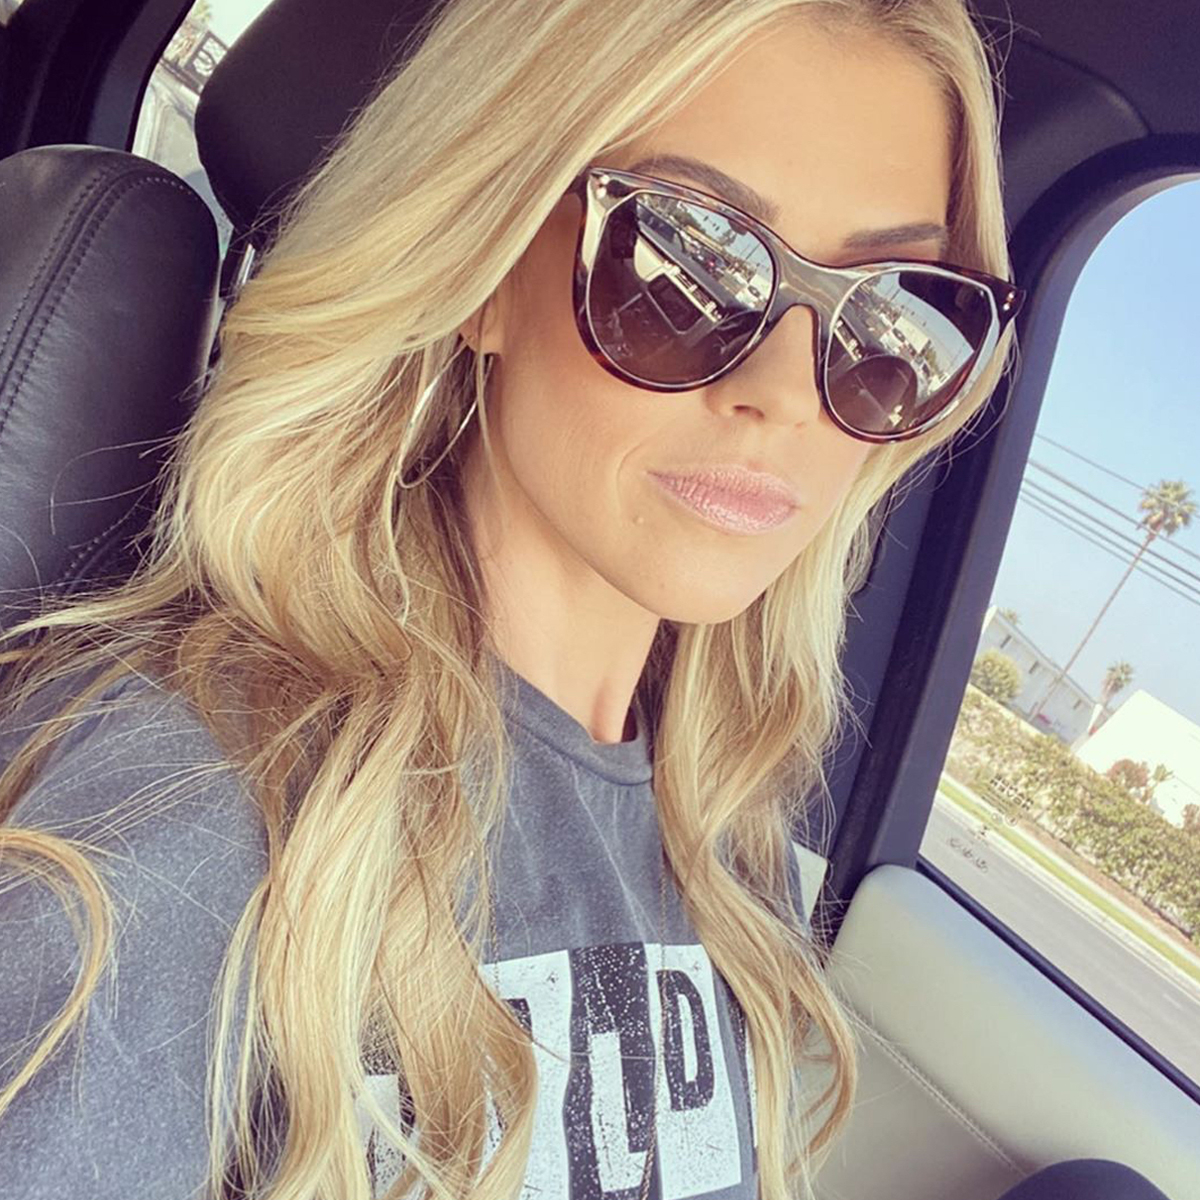 Christina Anstead Slams “Absent Mother” Claim in Message to Haters